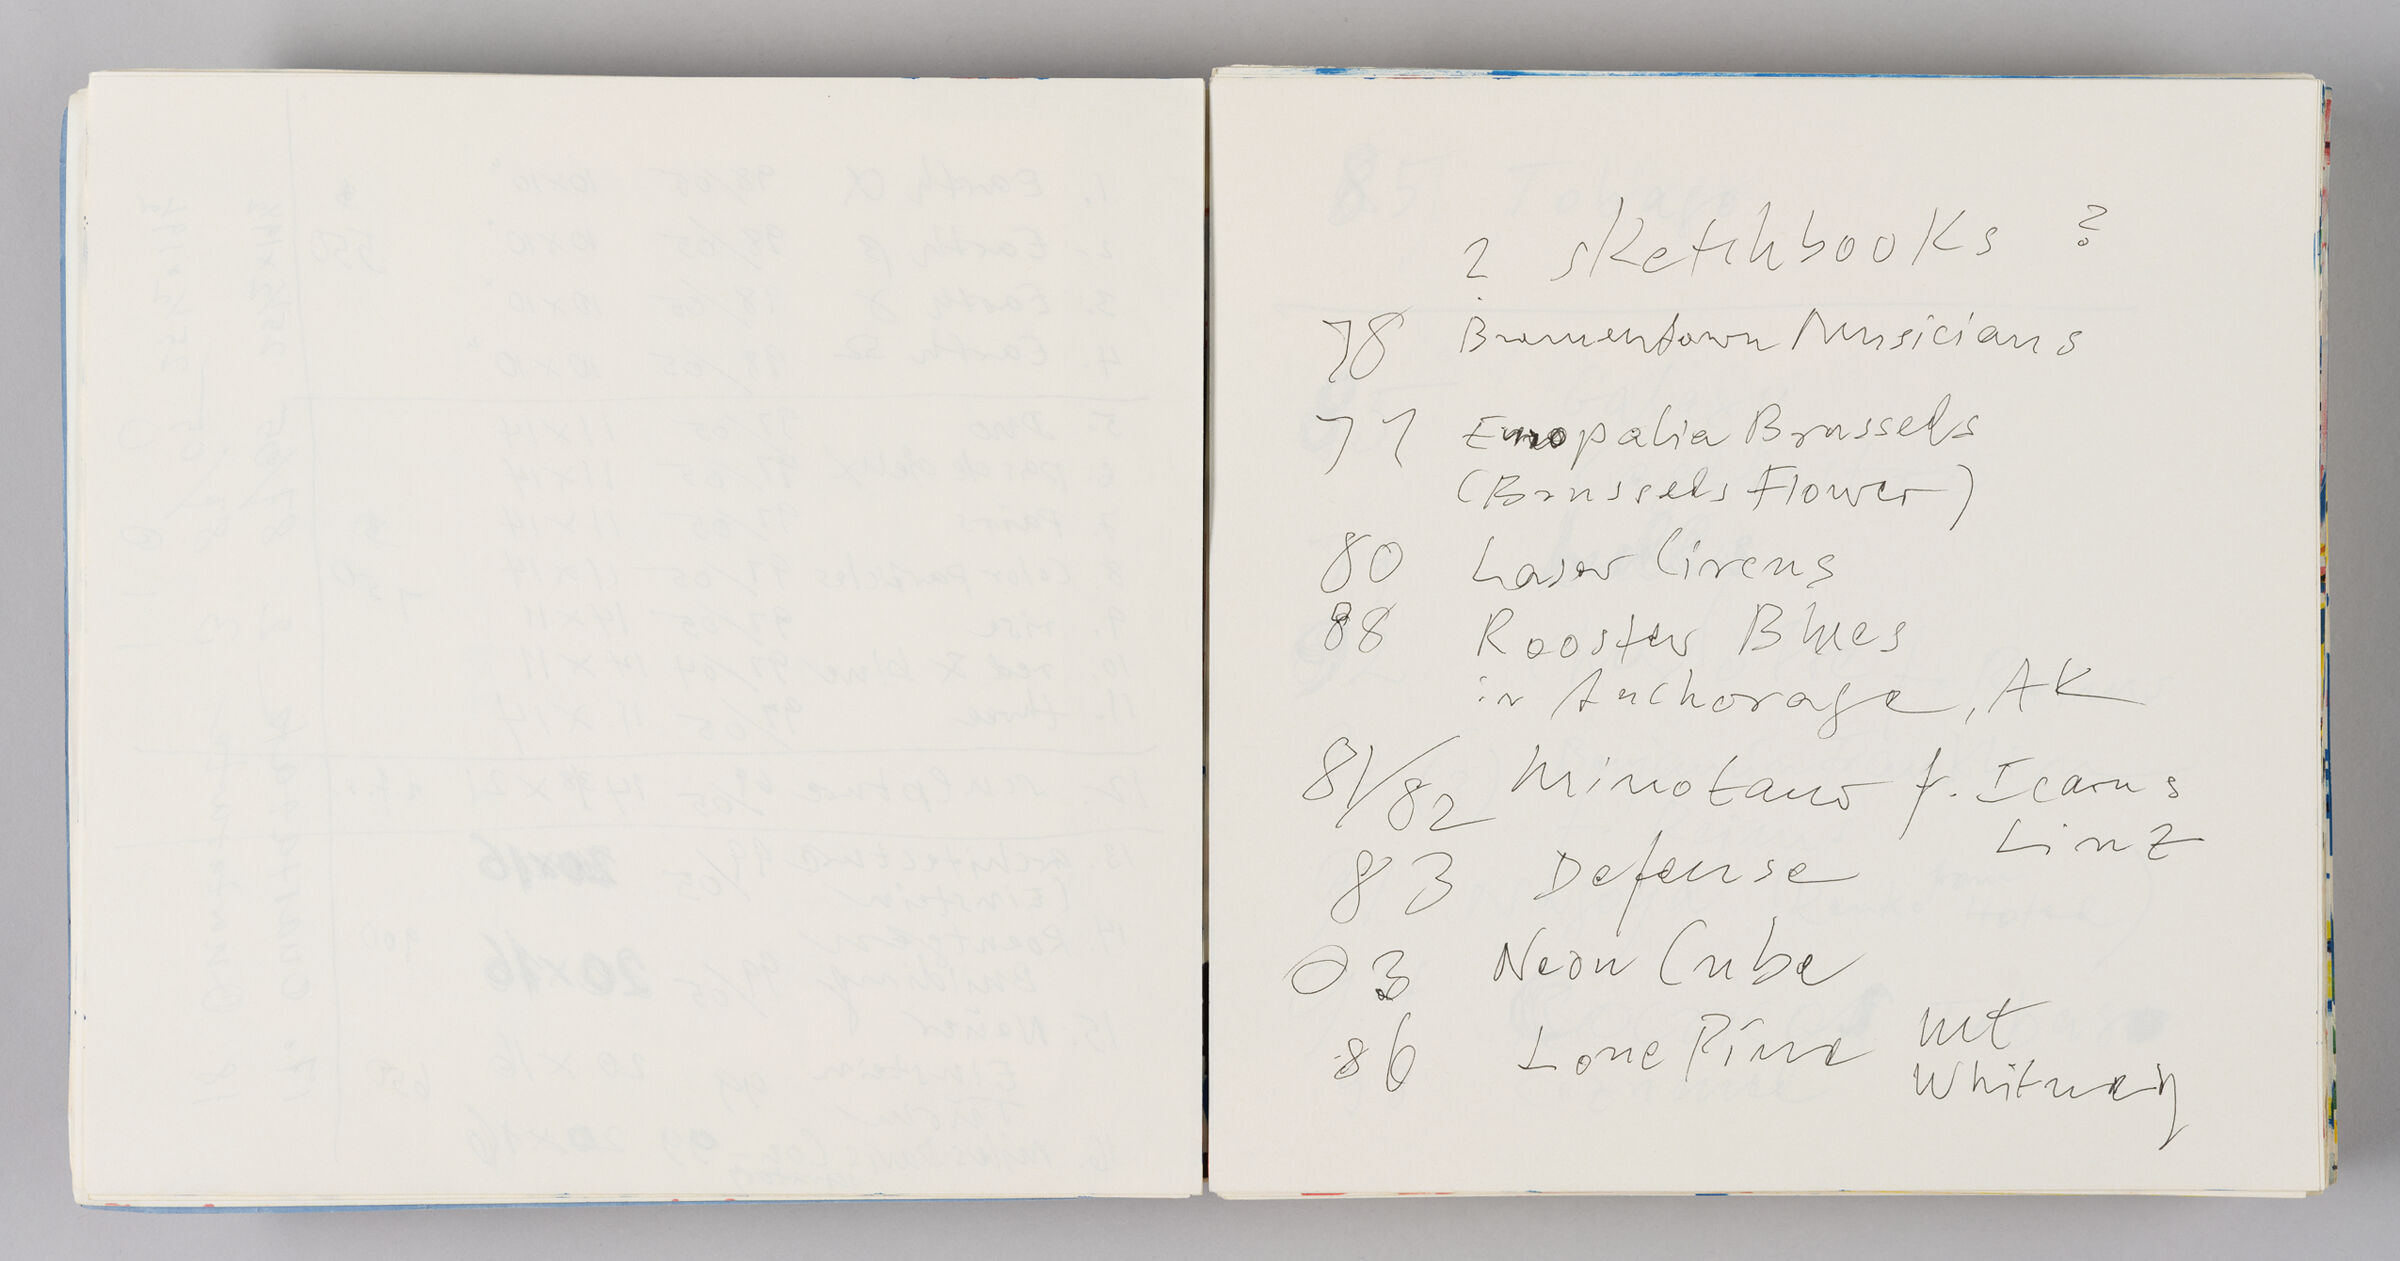 Untitled (Bleed-Through Of Previous Page, Left Page); Untitled (Notes On Gallery Show Of Sketchbooks, Right Page)